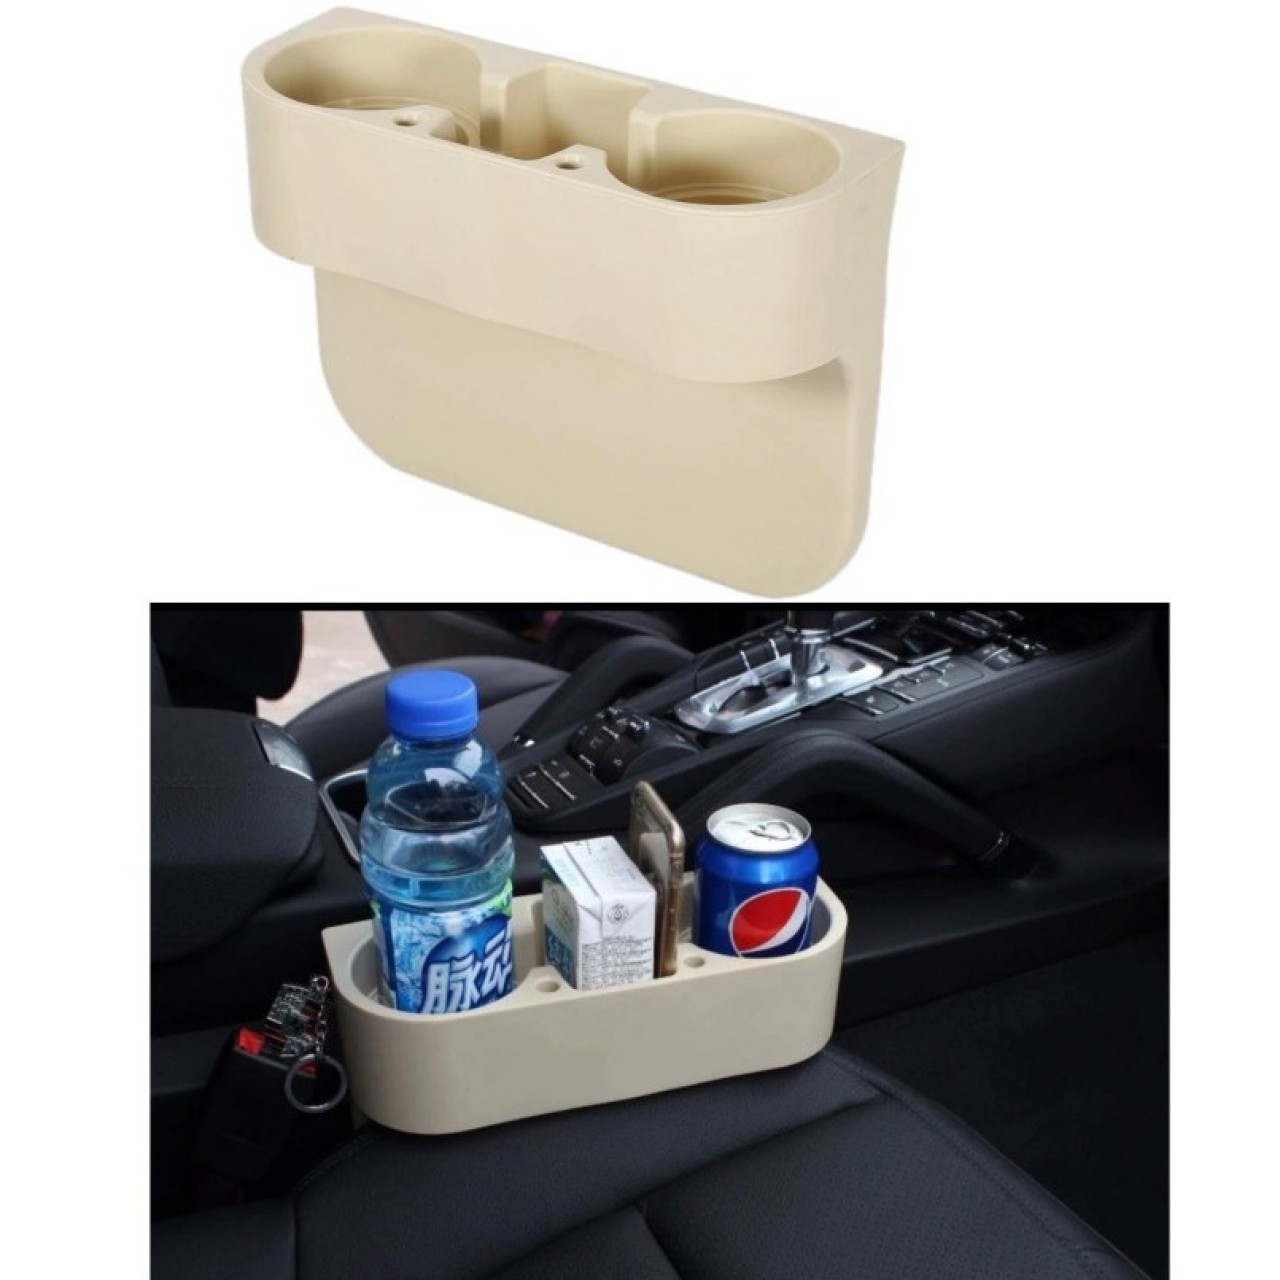 Car Cup Holder Portable Multifunction Vehicle Seat Gap Cup Bottle Phone Drink Holder Stand - Beige